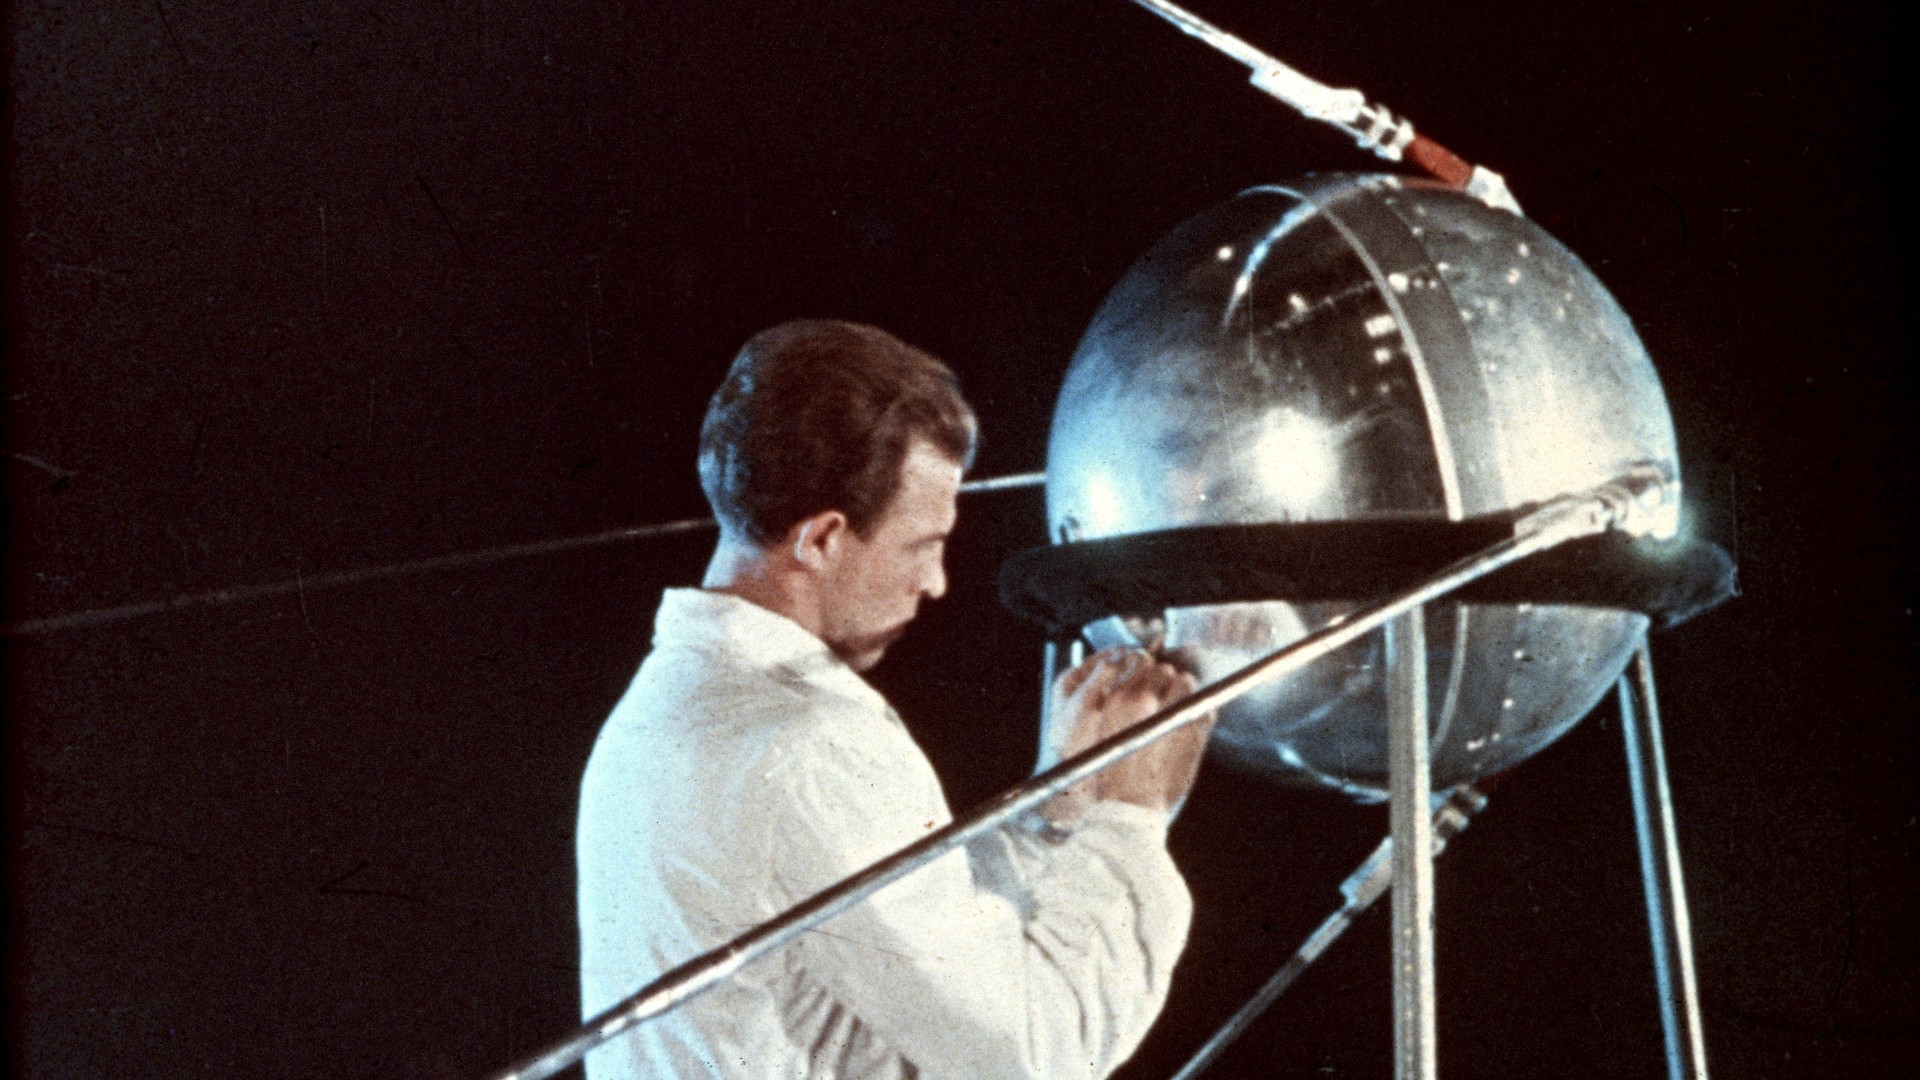 A technician working on the Soviet satellite, the first manmade object to orbit the earth